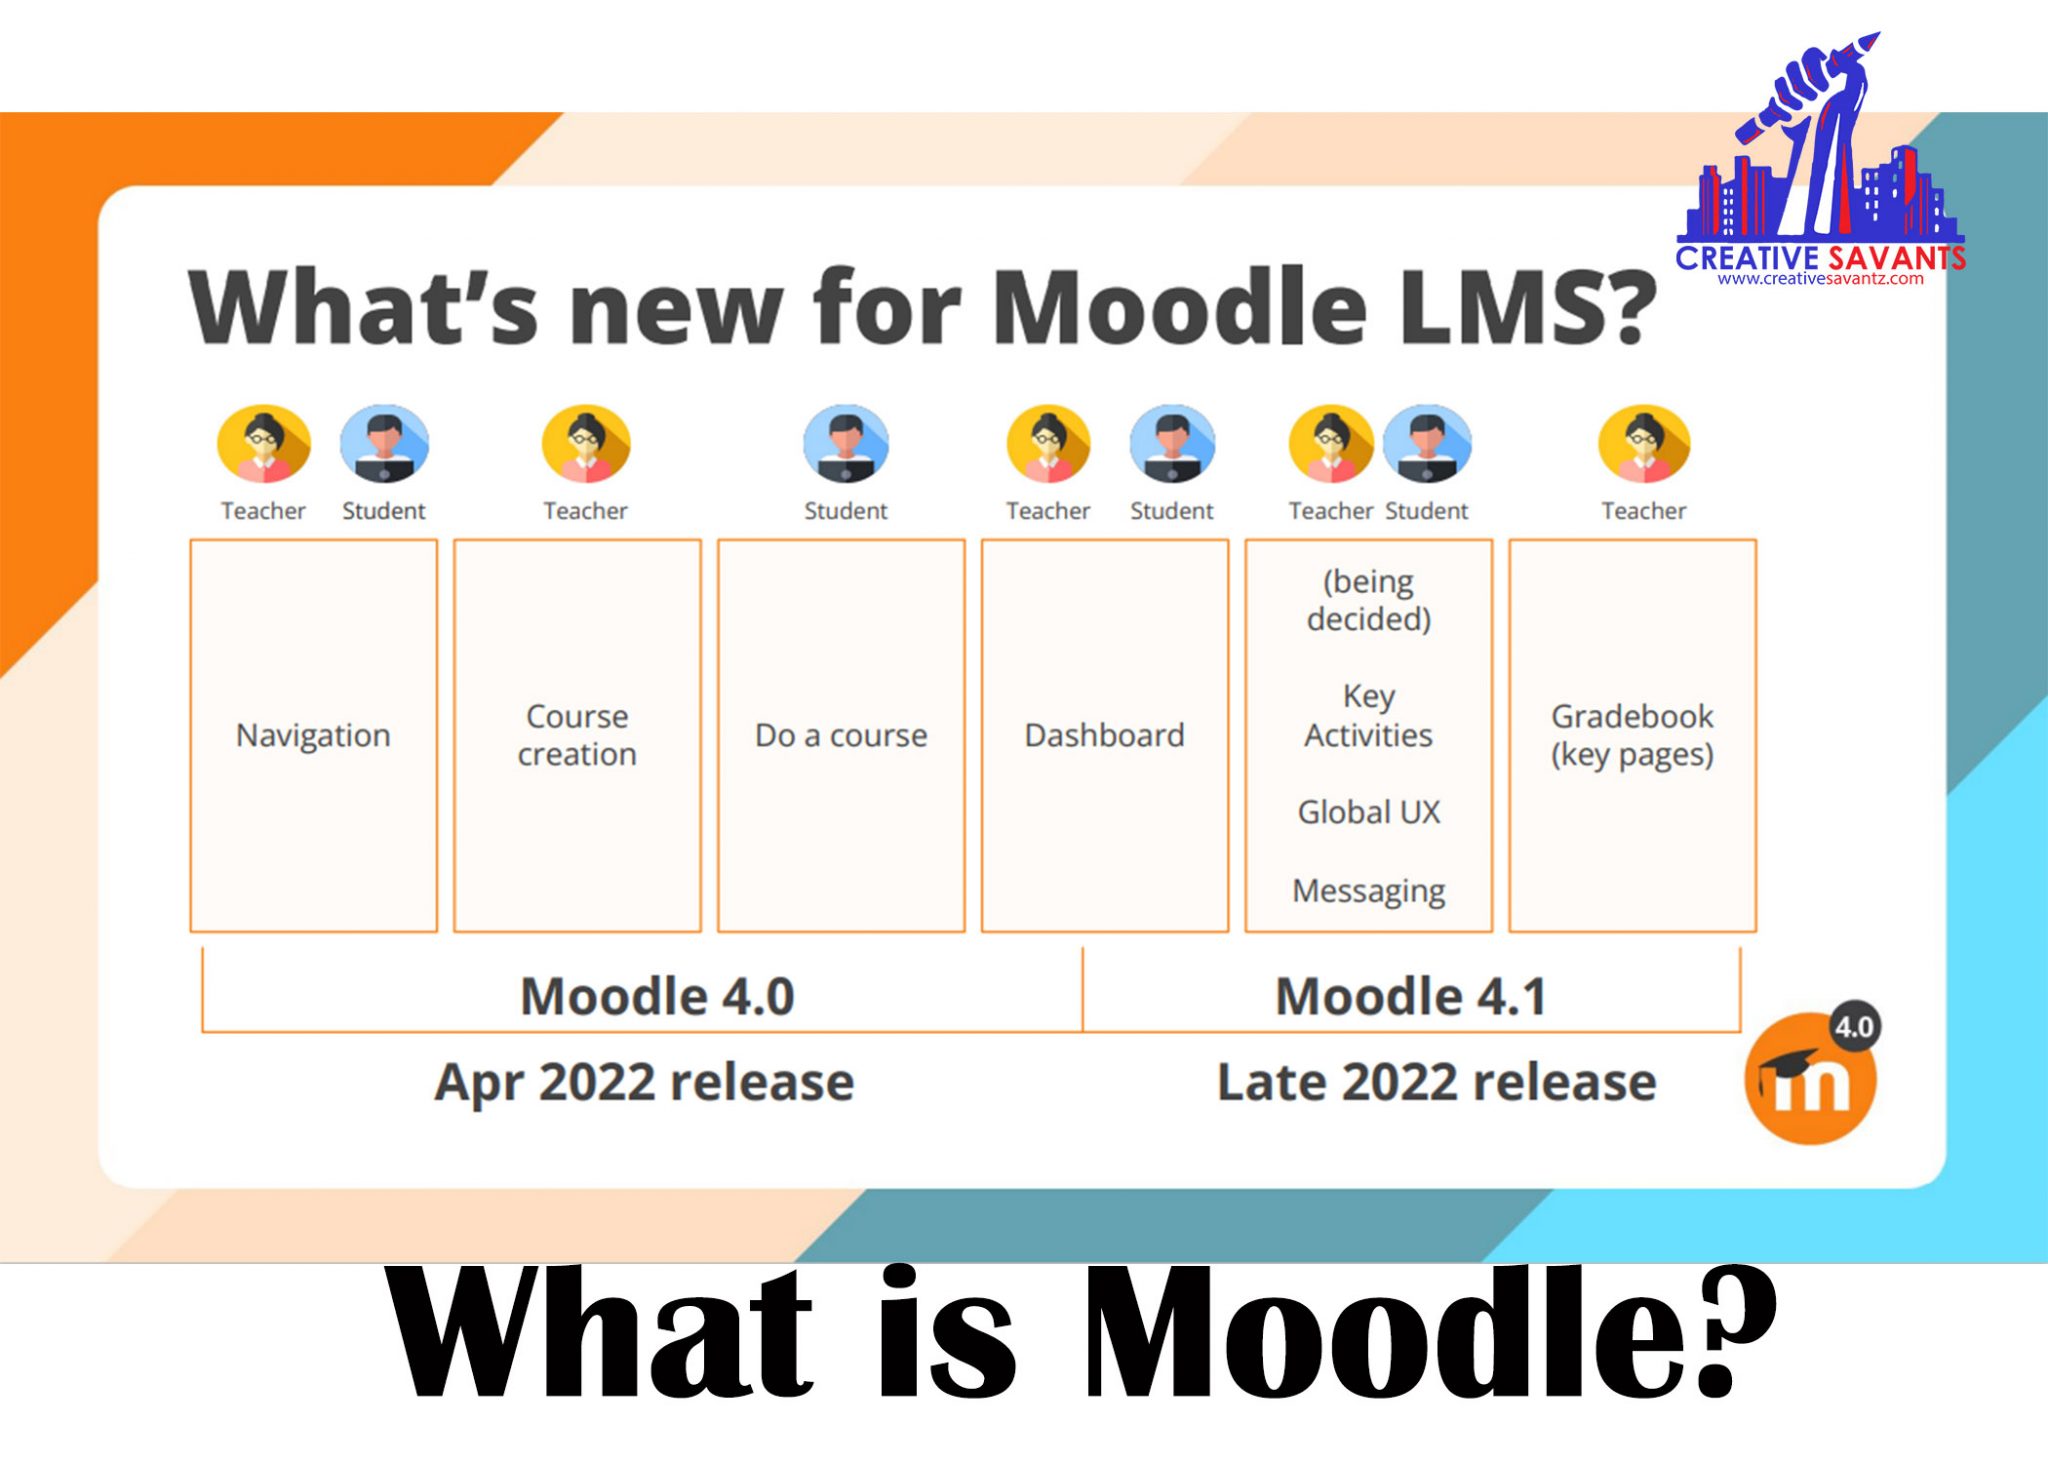 Overview of Moodle LMS